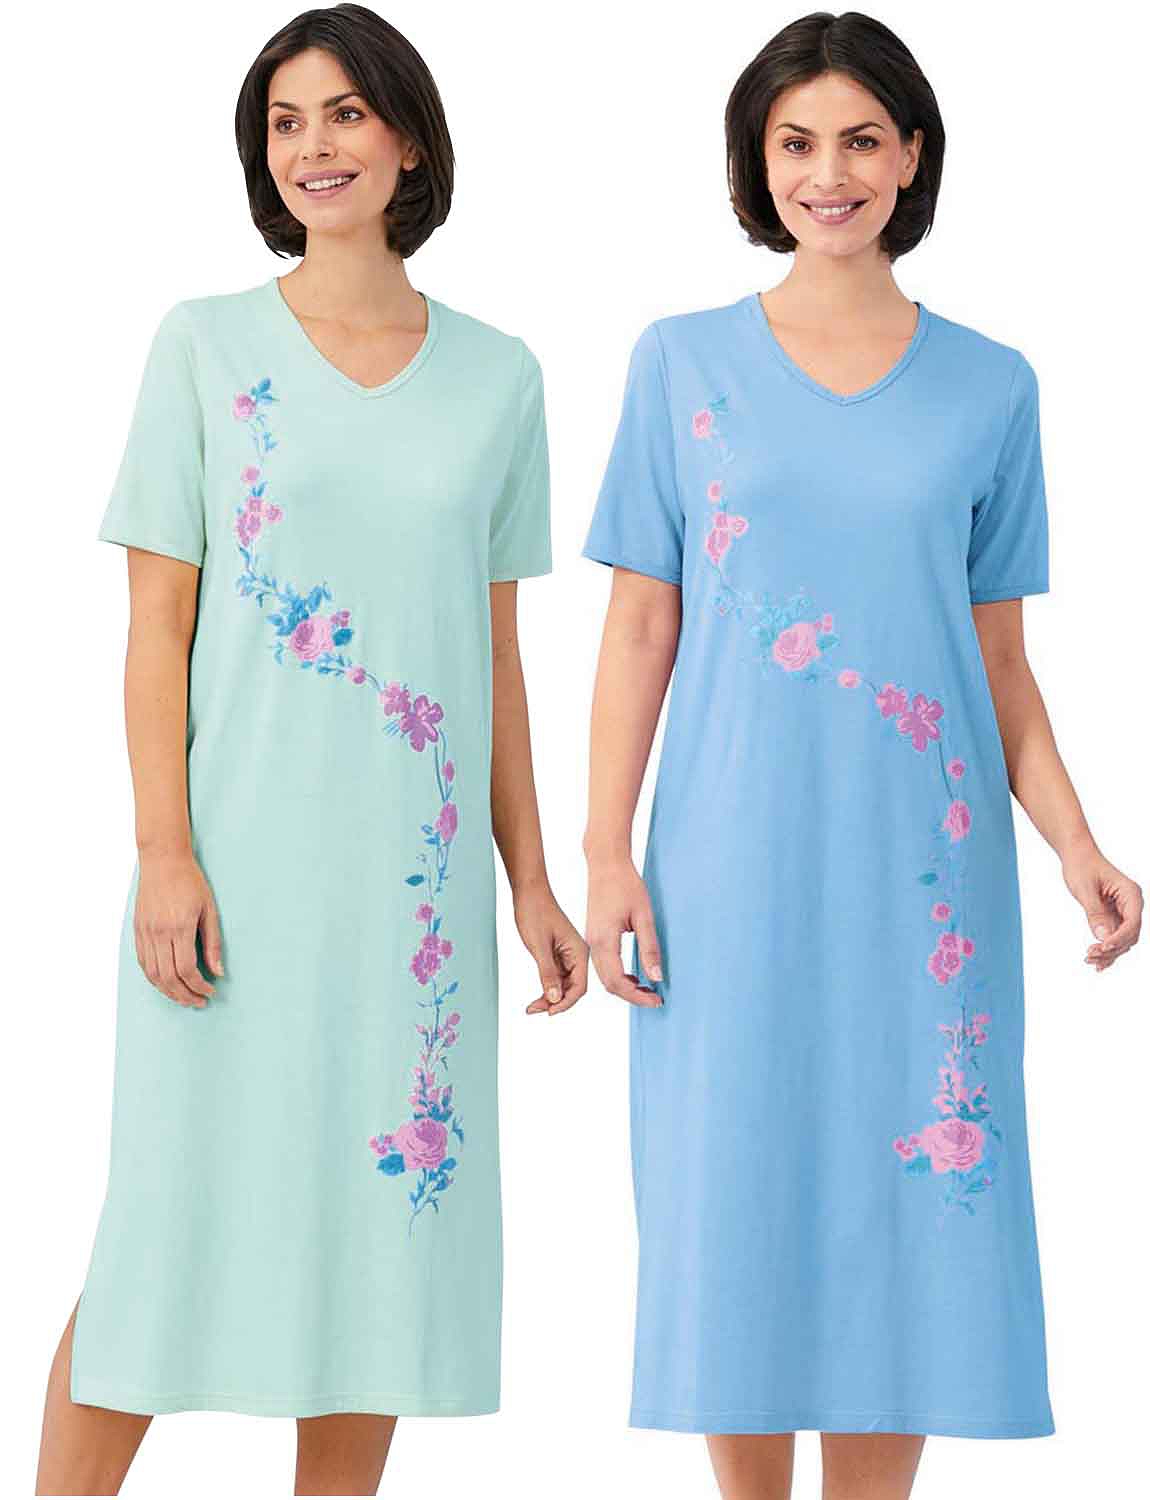 Pack Of 2 Nightdresses | Chums